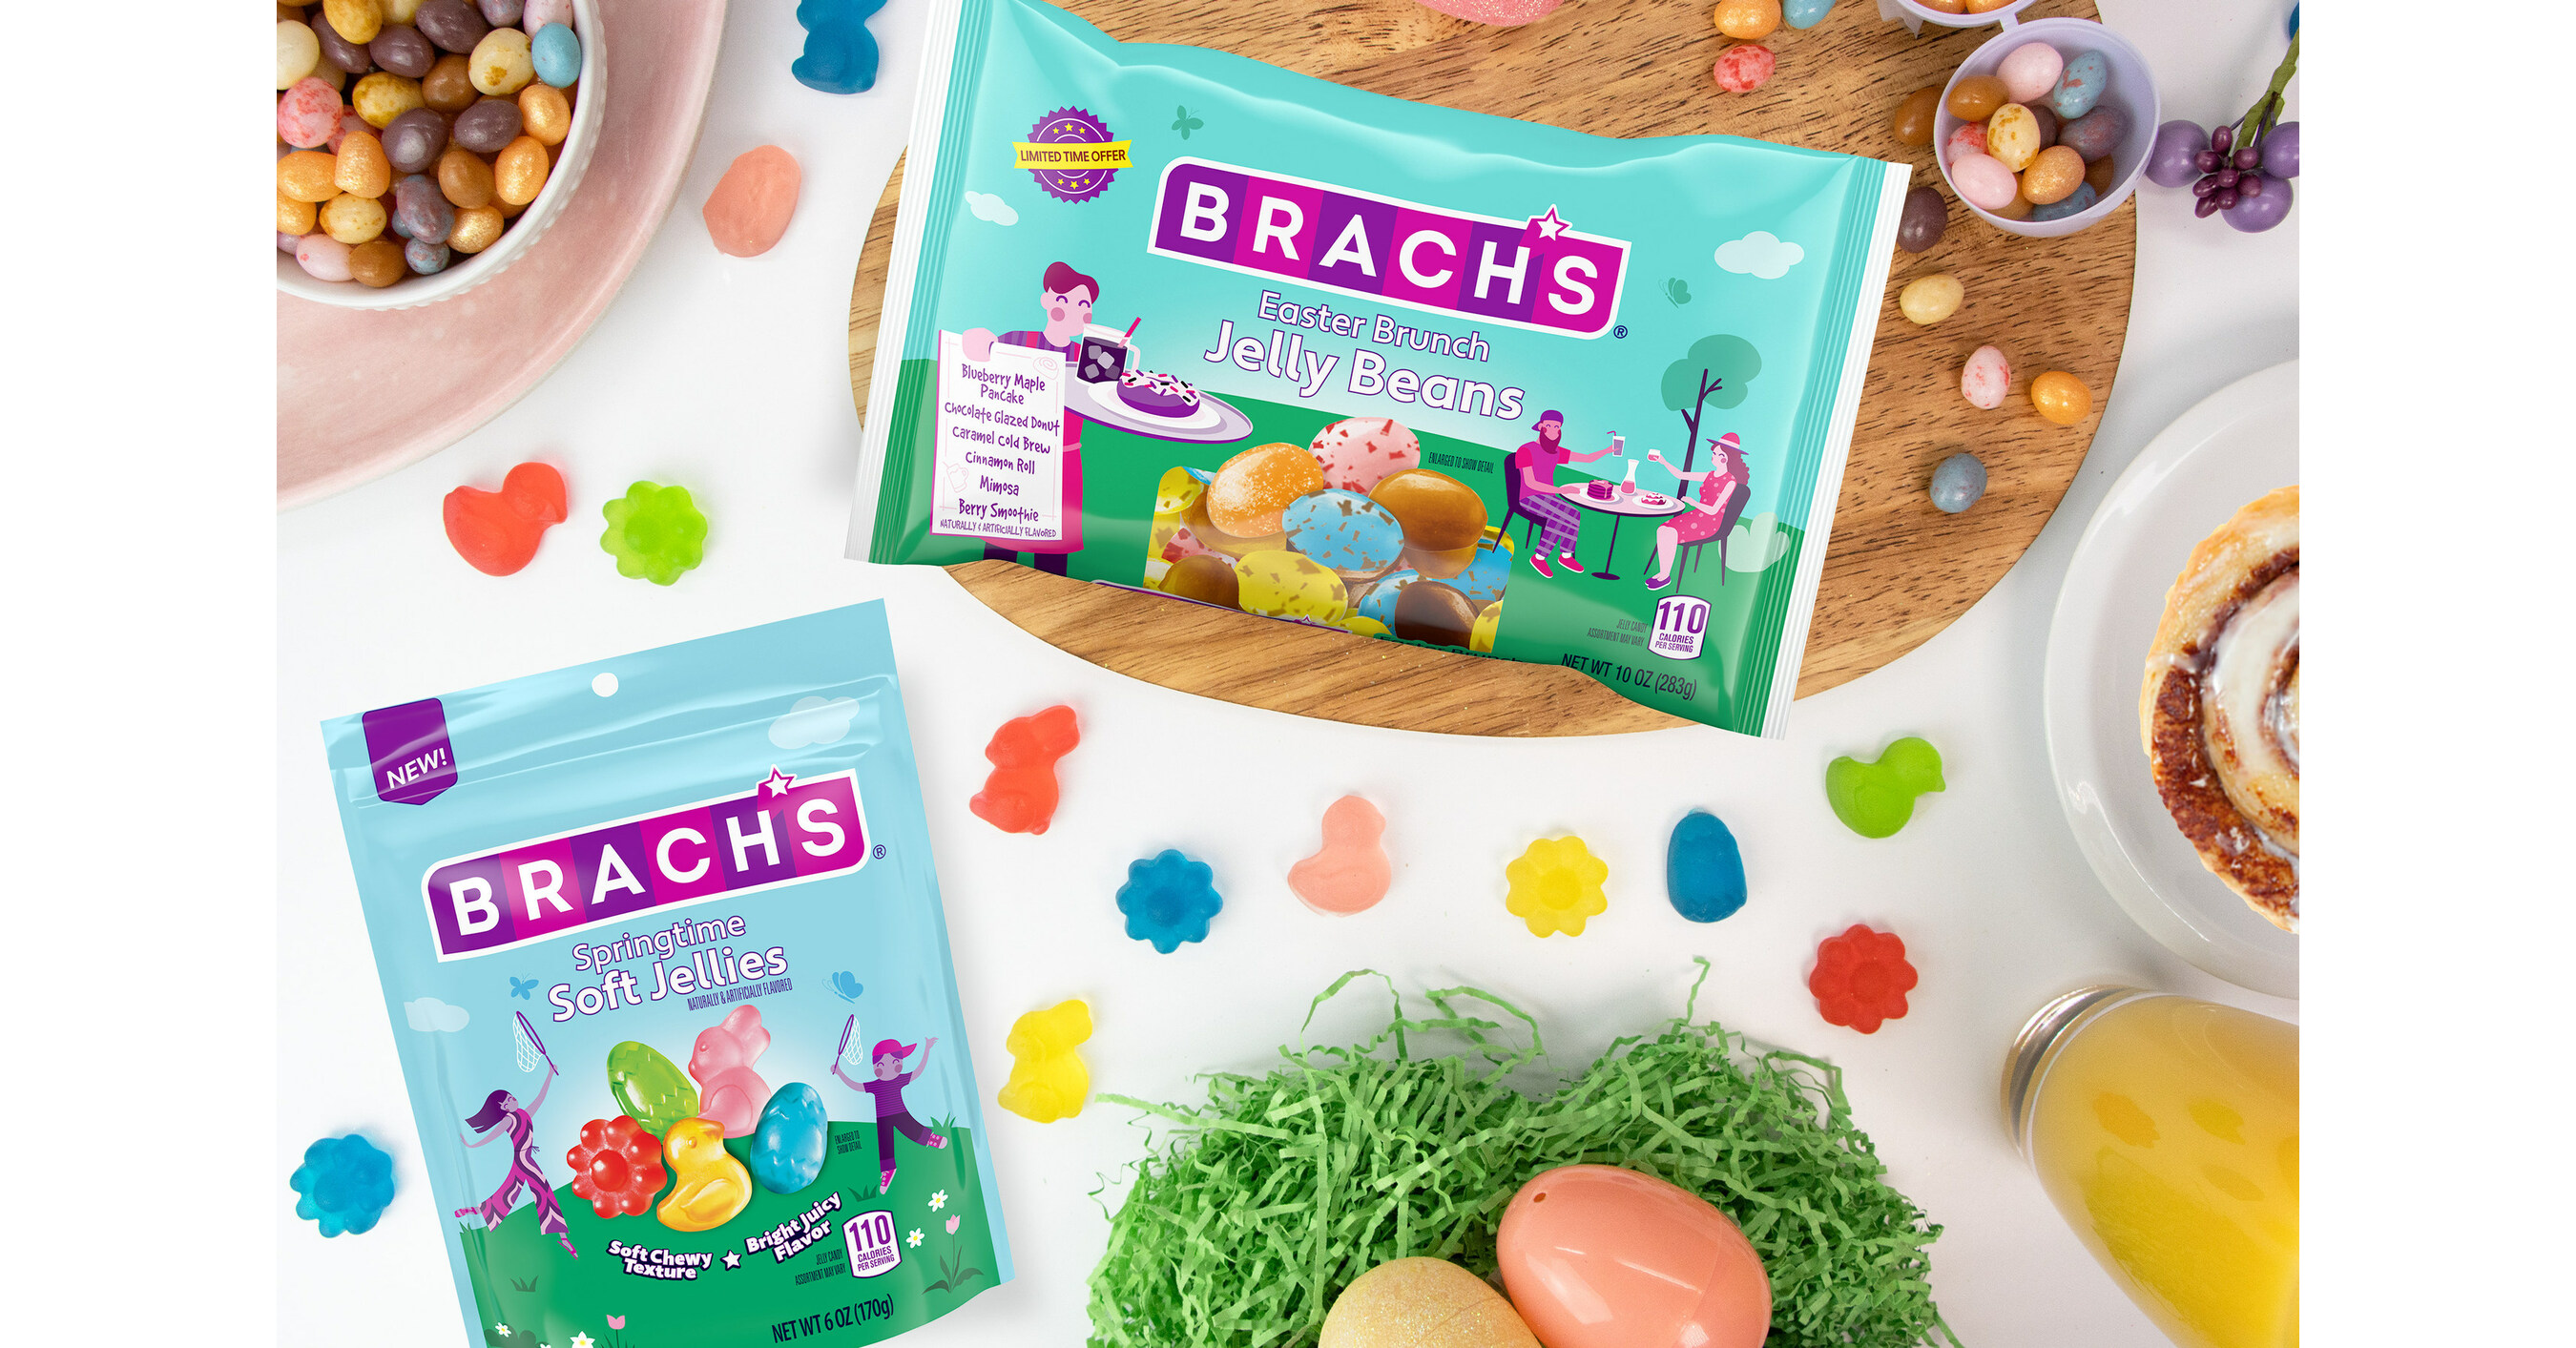 Just In Time for Springtime Celebrations, BRACH'S® Launches New